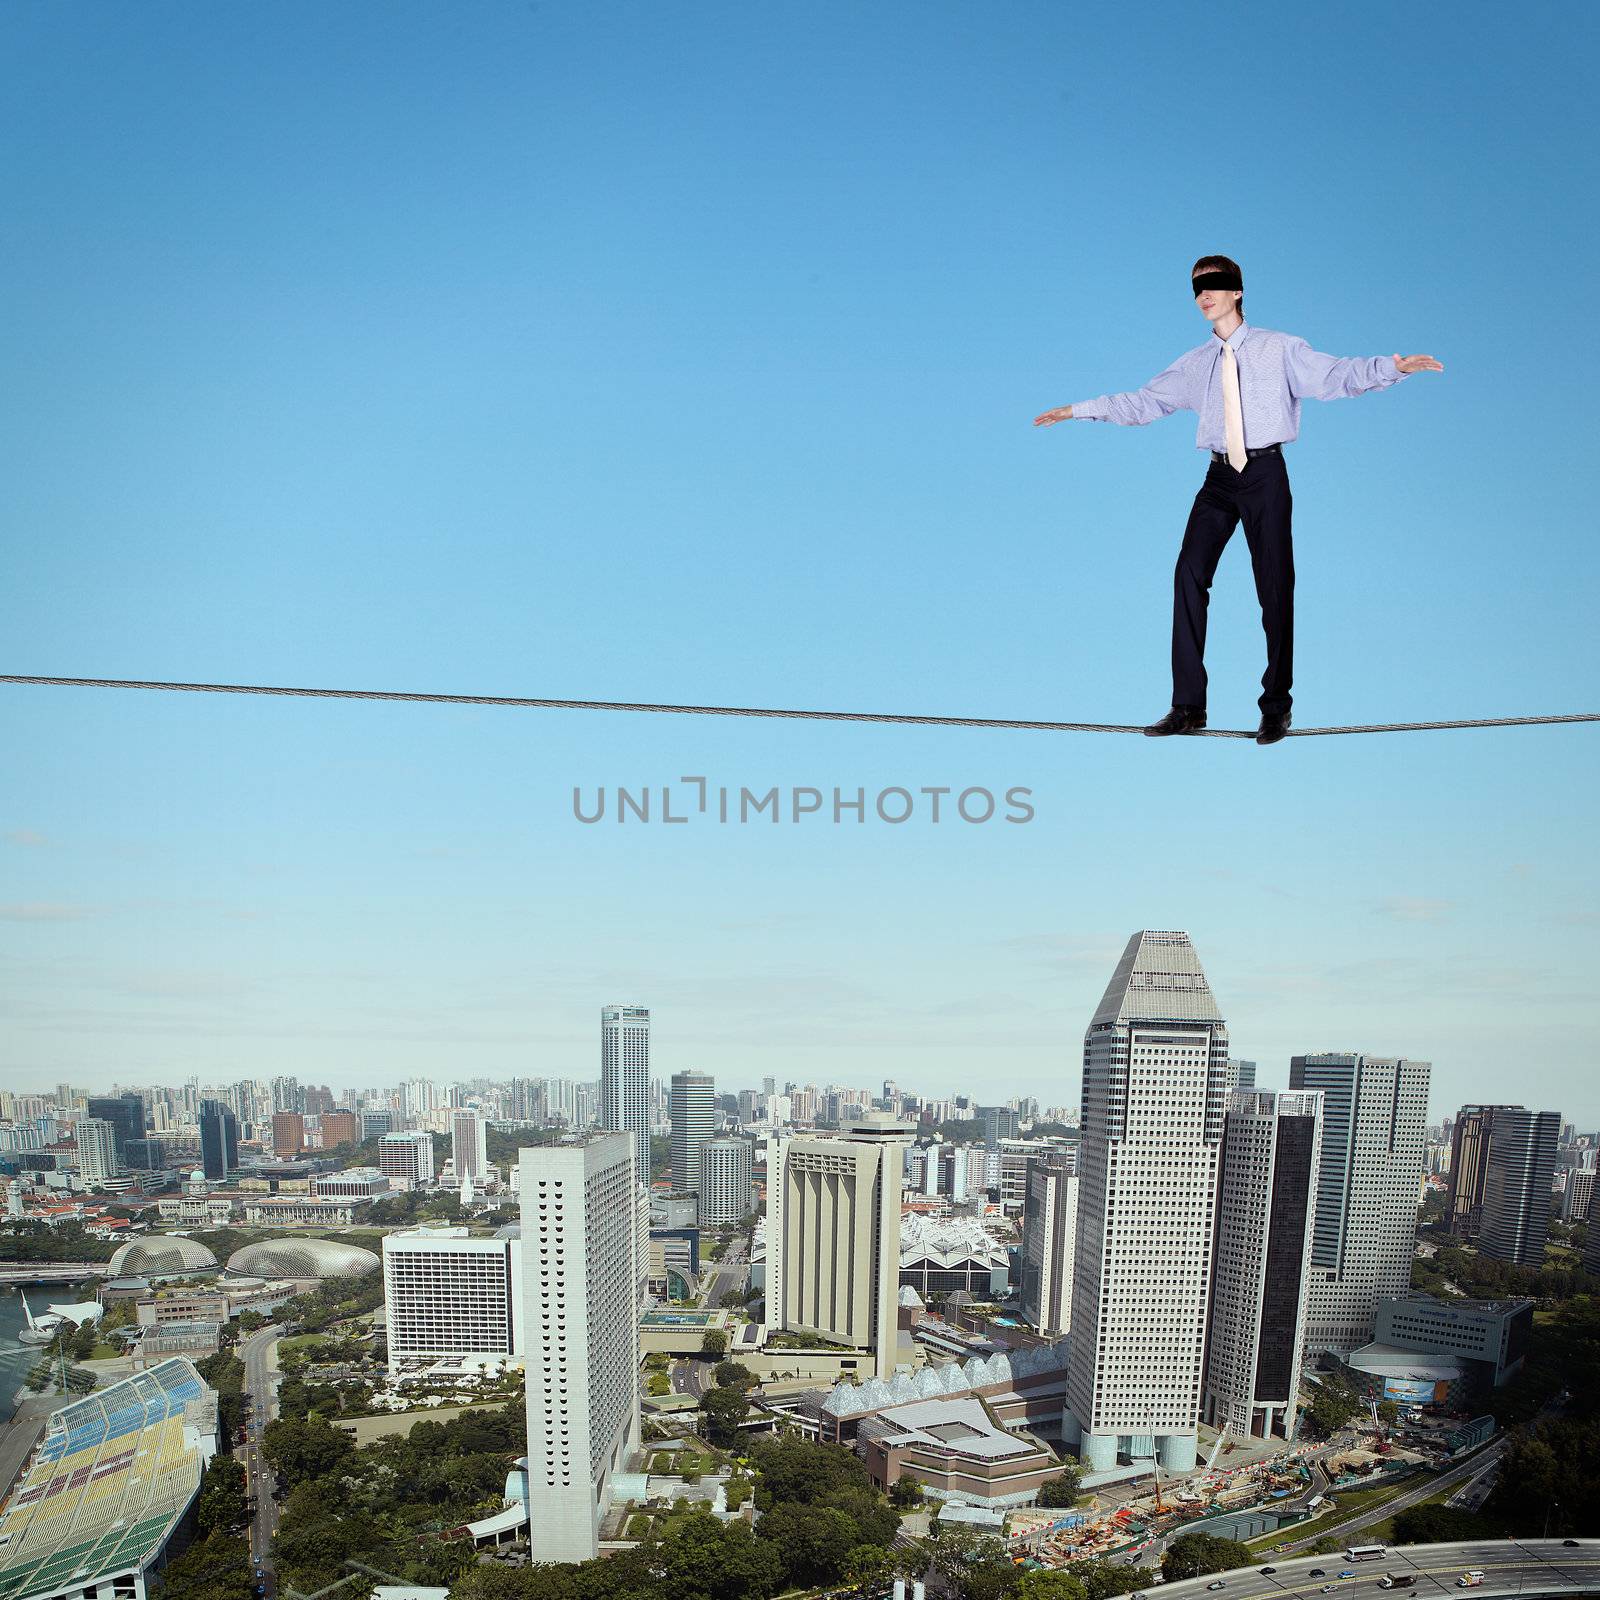 Business man balancing high over a cityscape